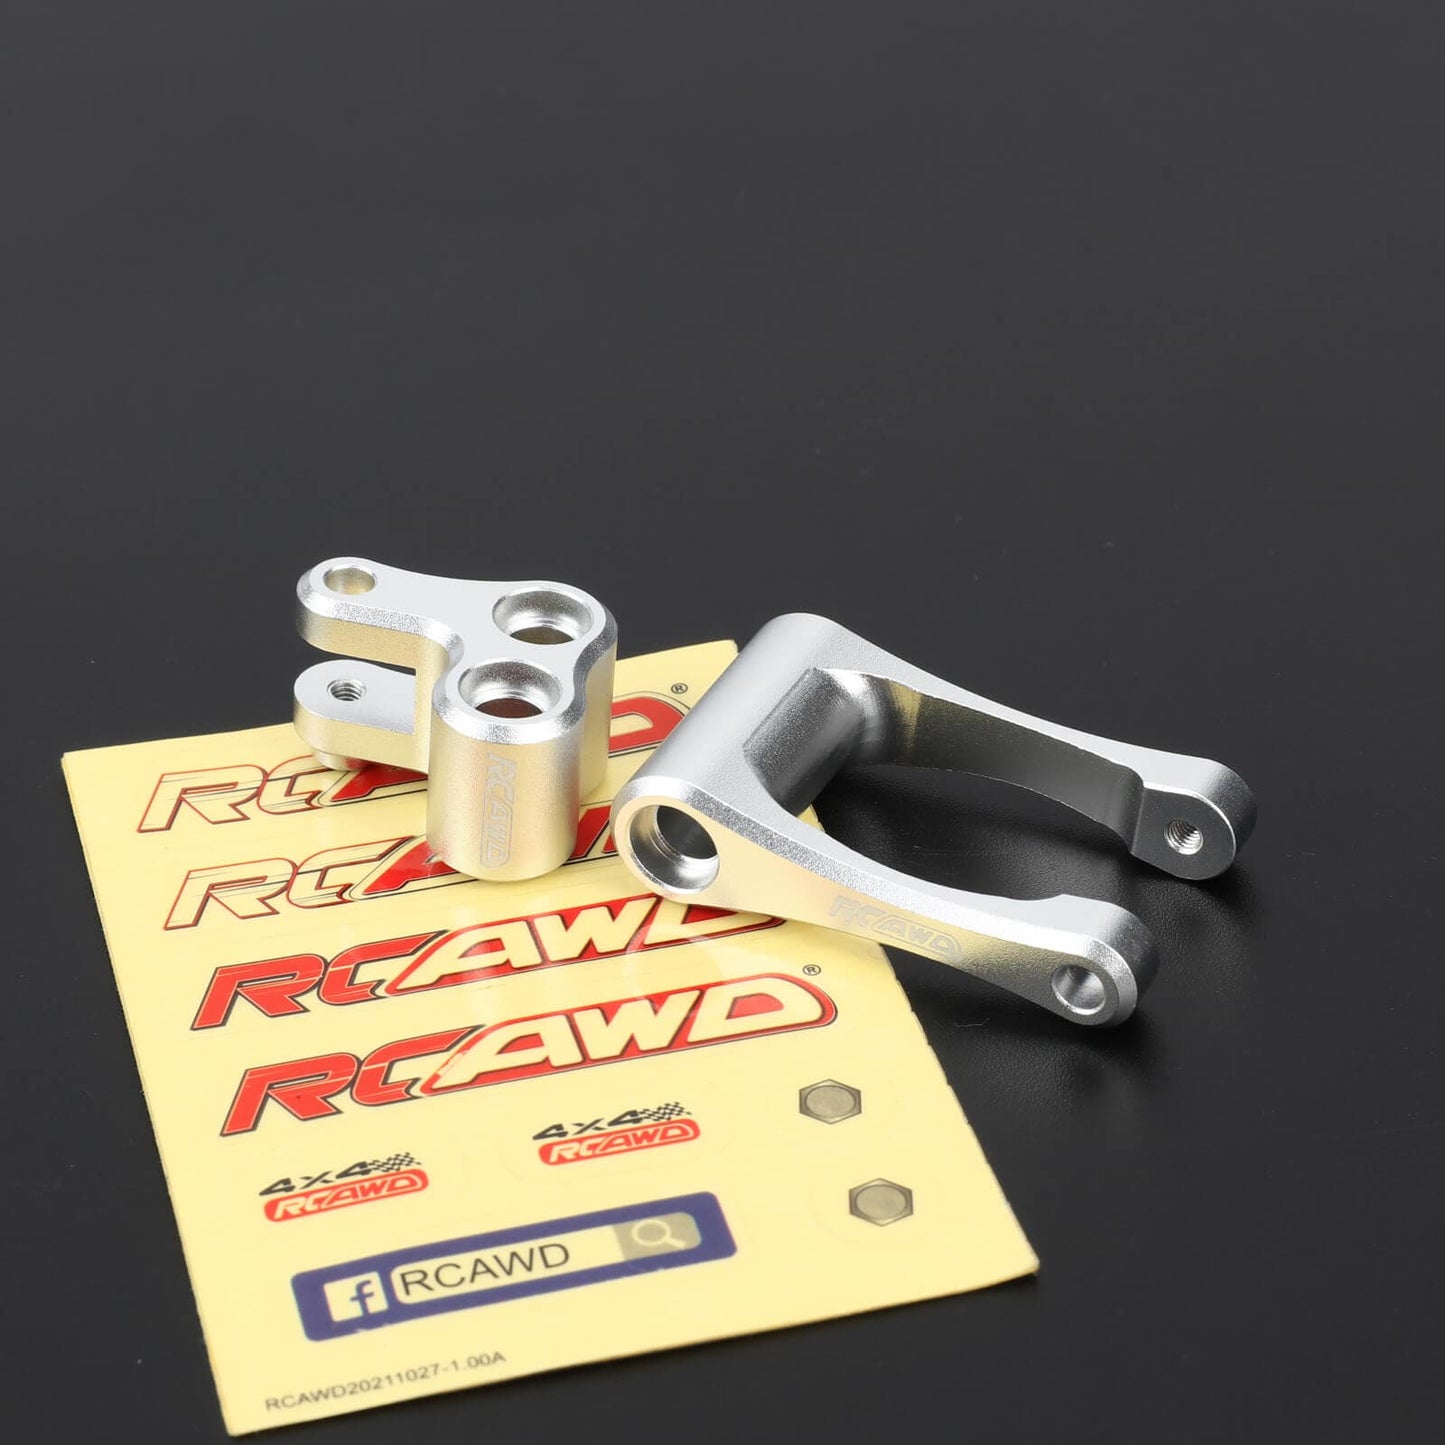 RCAWD 1/4 Losi Promoto - MX Upgrades Aluminum Knuckle & Pull Rod for losi Motorcycle LOS364001S - RCAWD